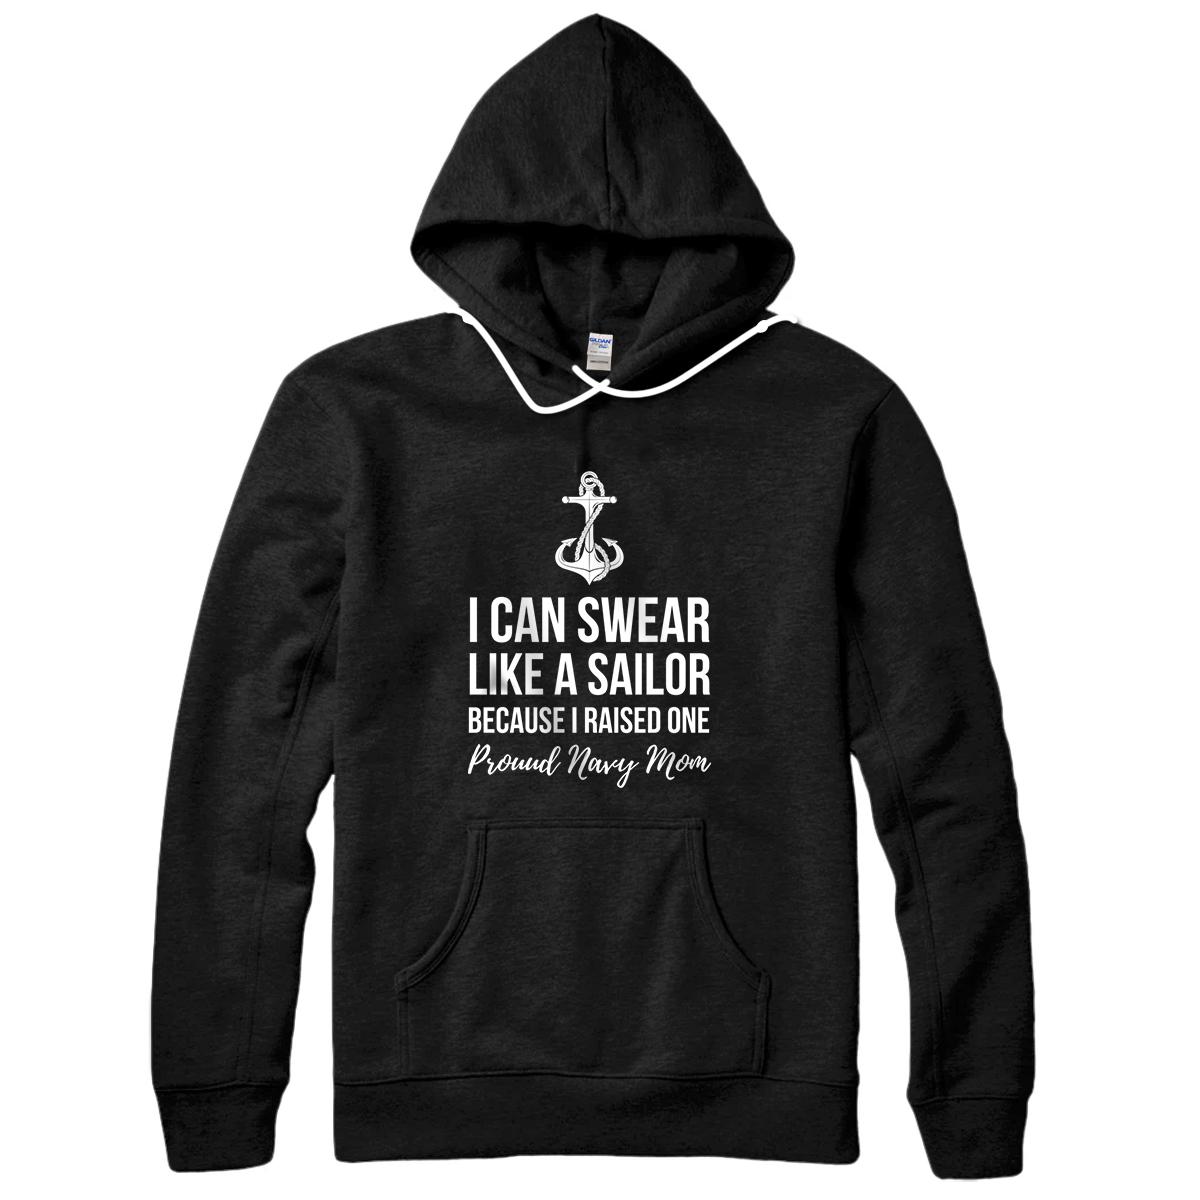 Personalized I Can Swear Like A Sailor Because I Raised One Navy Mom Pullover Hoodie